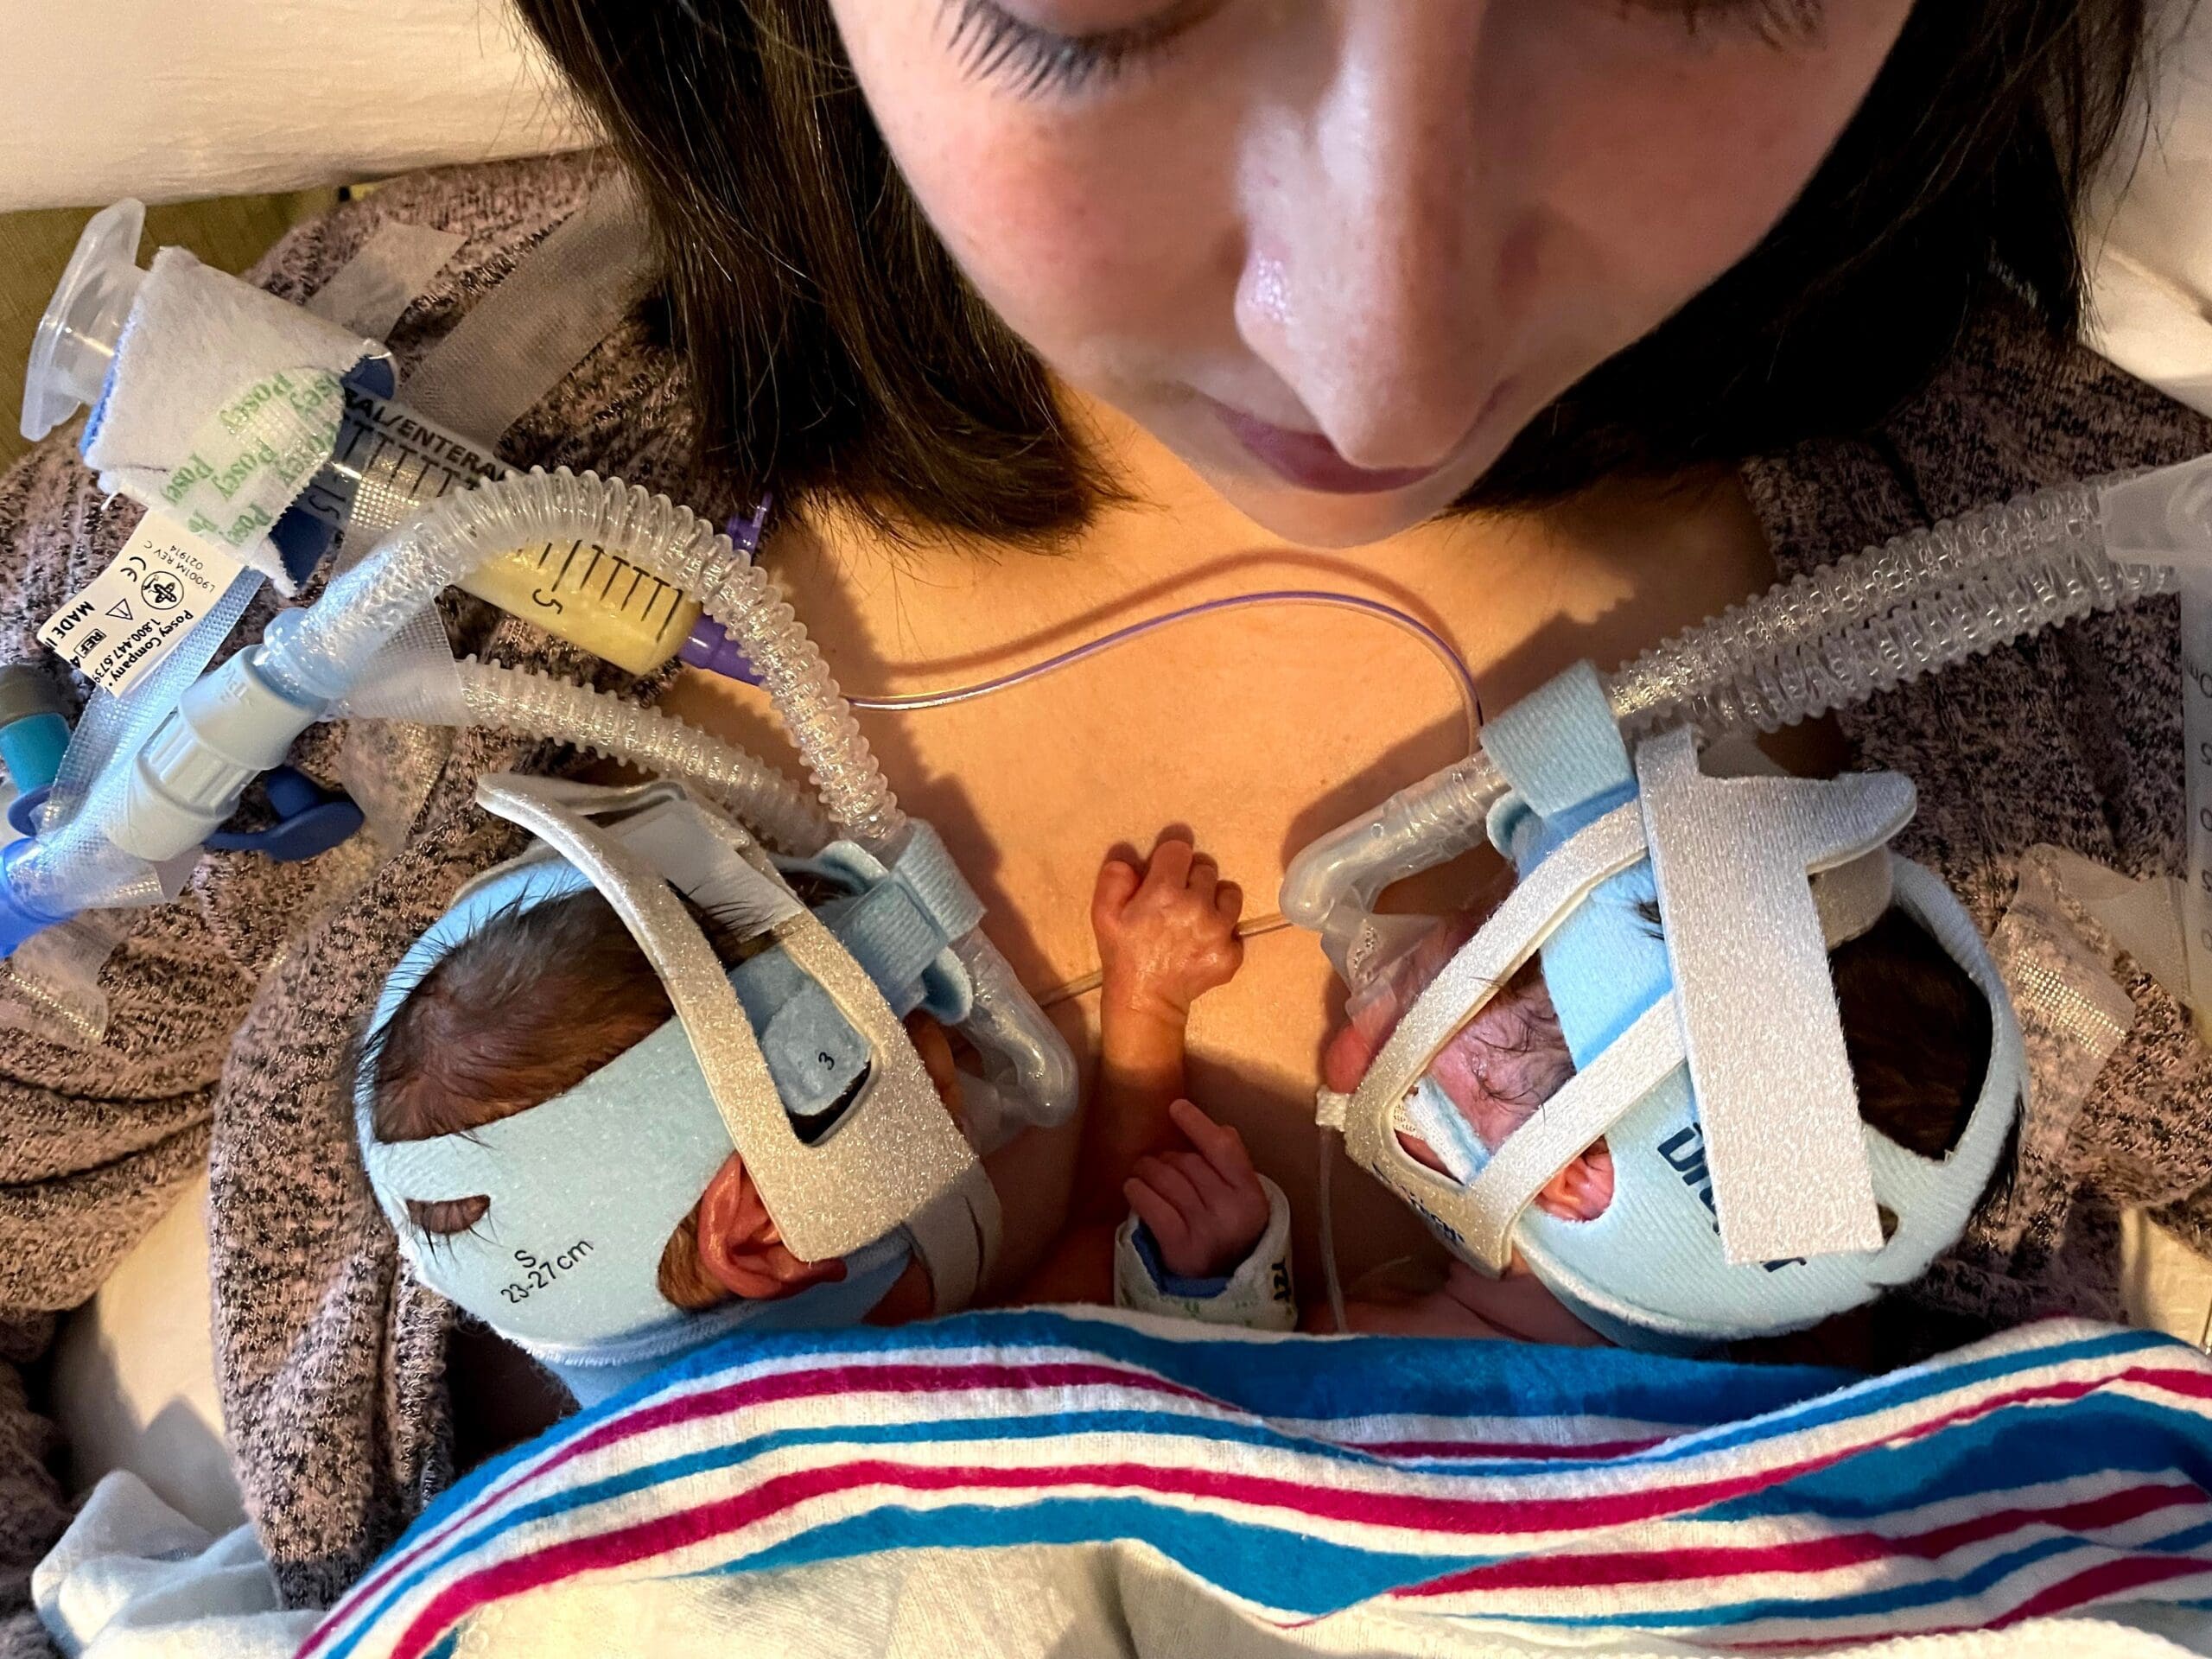 26 week old twin girls lay on their momma connected to medical devices.